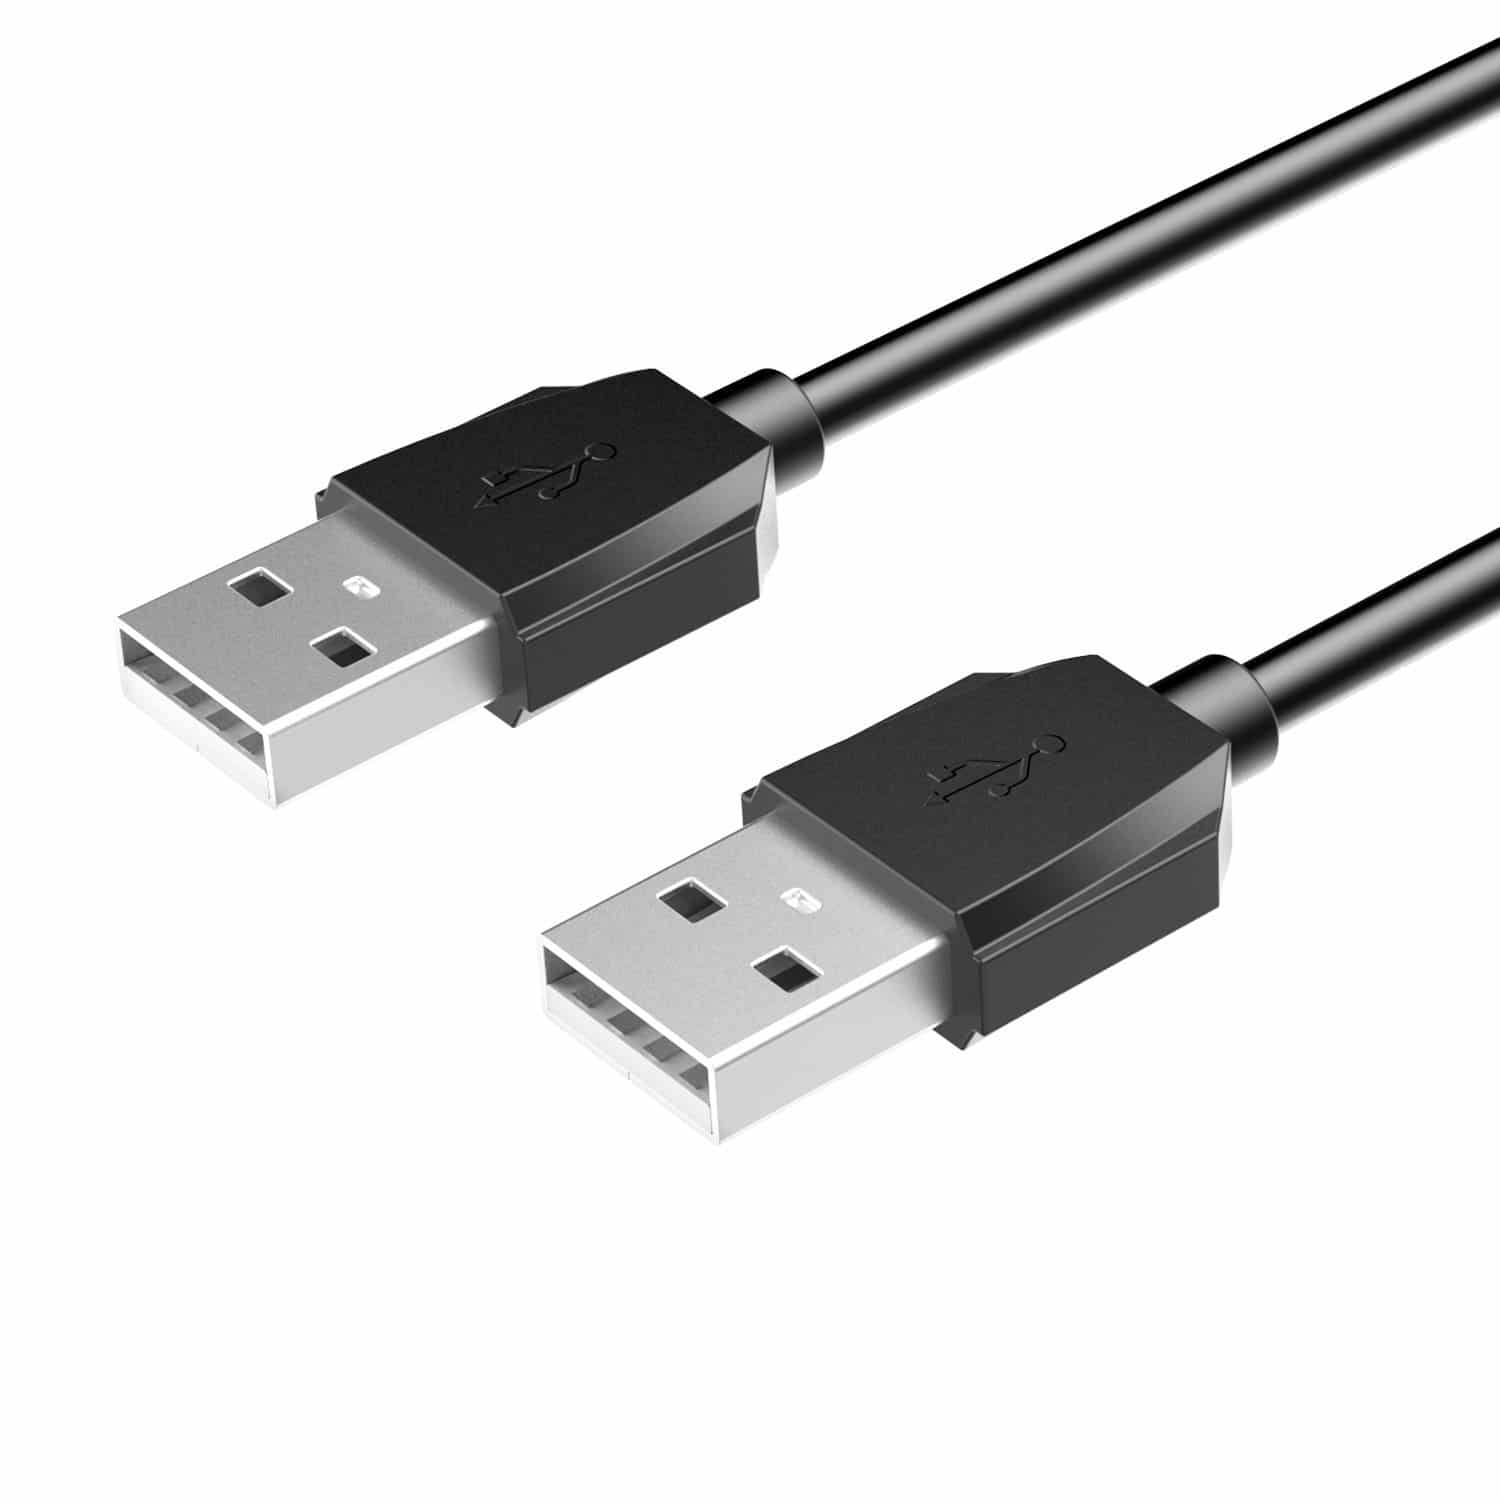 HAVIT 2-Feet USB 2.0 Type A Male to Type A Male Cable, Black